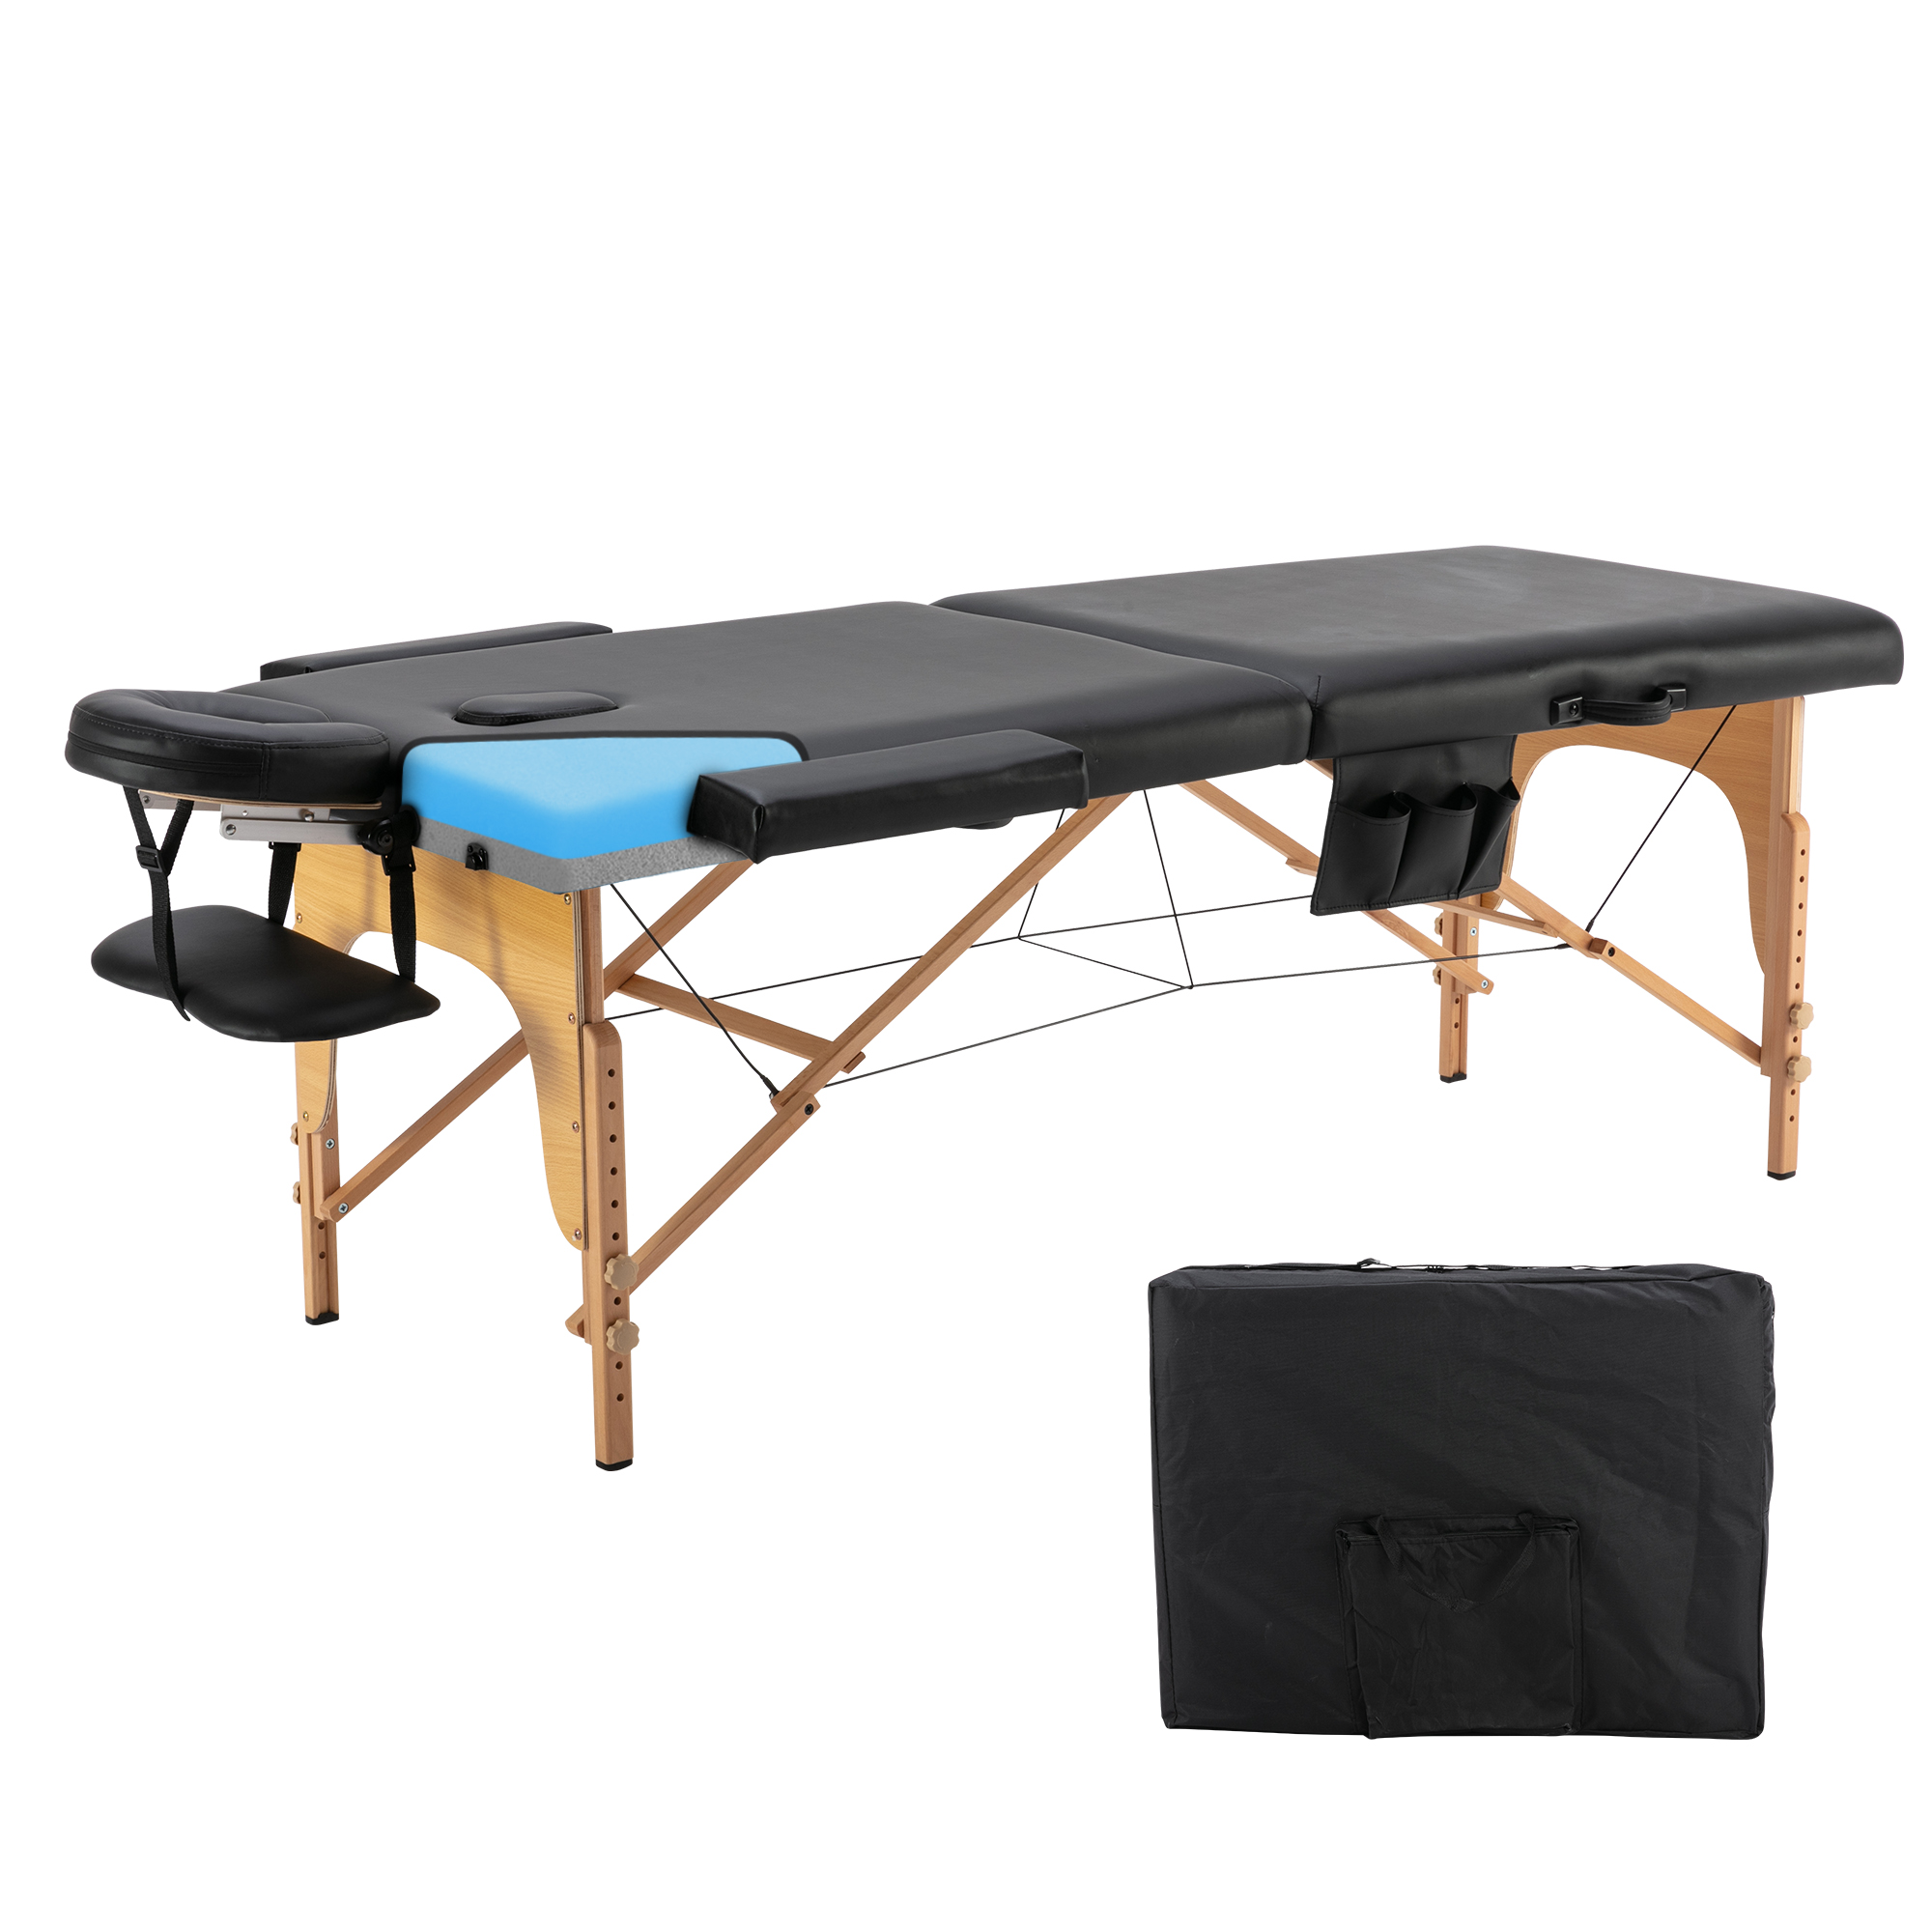 HengMing  Memory  Foam Portable Massage table ，2 Section Wooden  28  inch  Wide Adjustable Folding Massage Table,PU leather Spa Bed-CASAINC